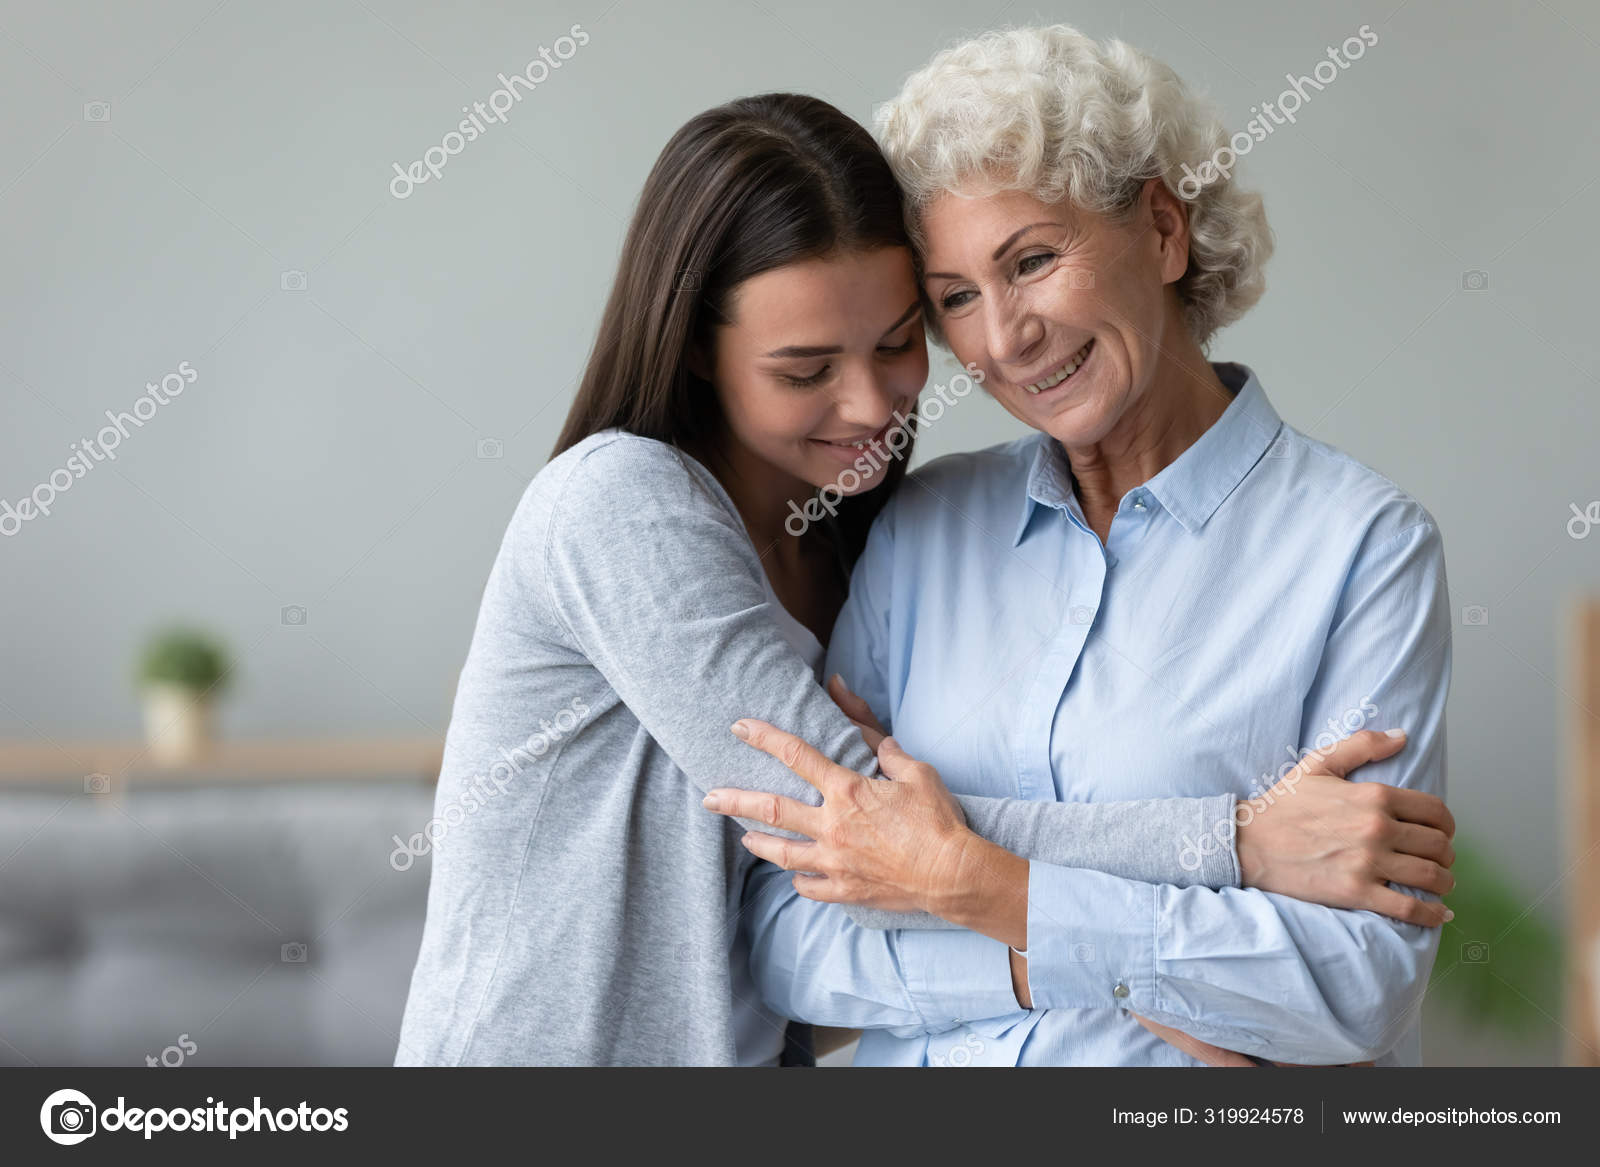 Caring young granddaughter hug old granny stand at Stock Photo ©fizkes 319924578